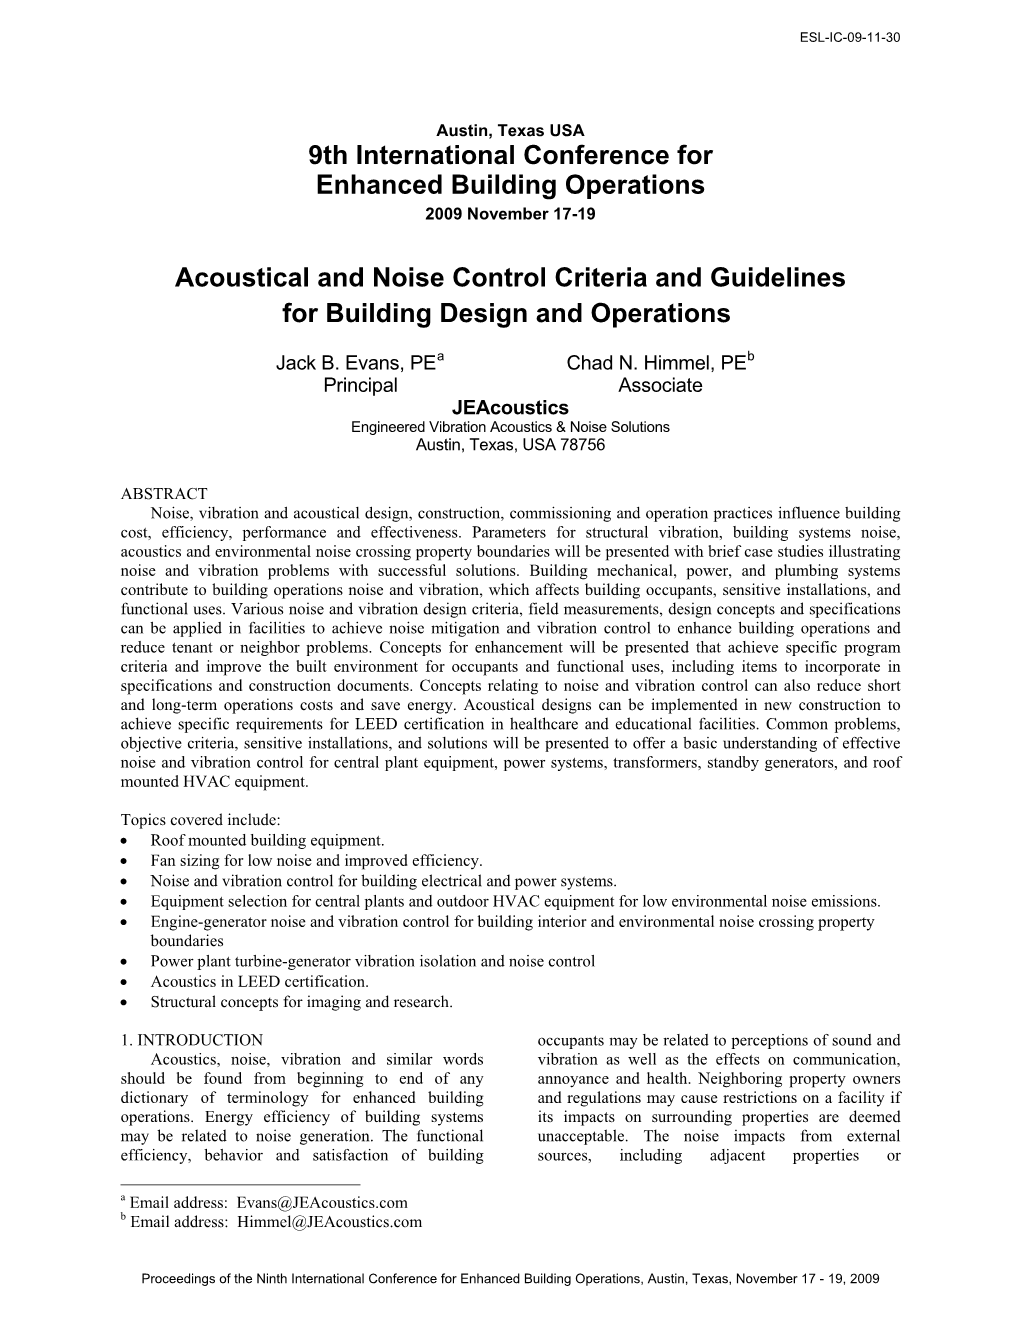 9Th International Conference for Enhanced Building Operations 2009 November 17-19